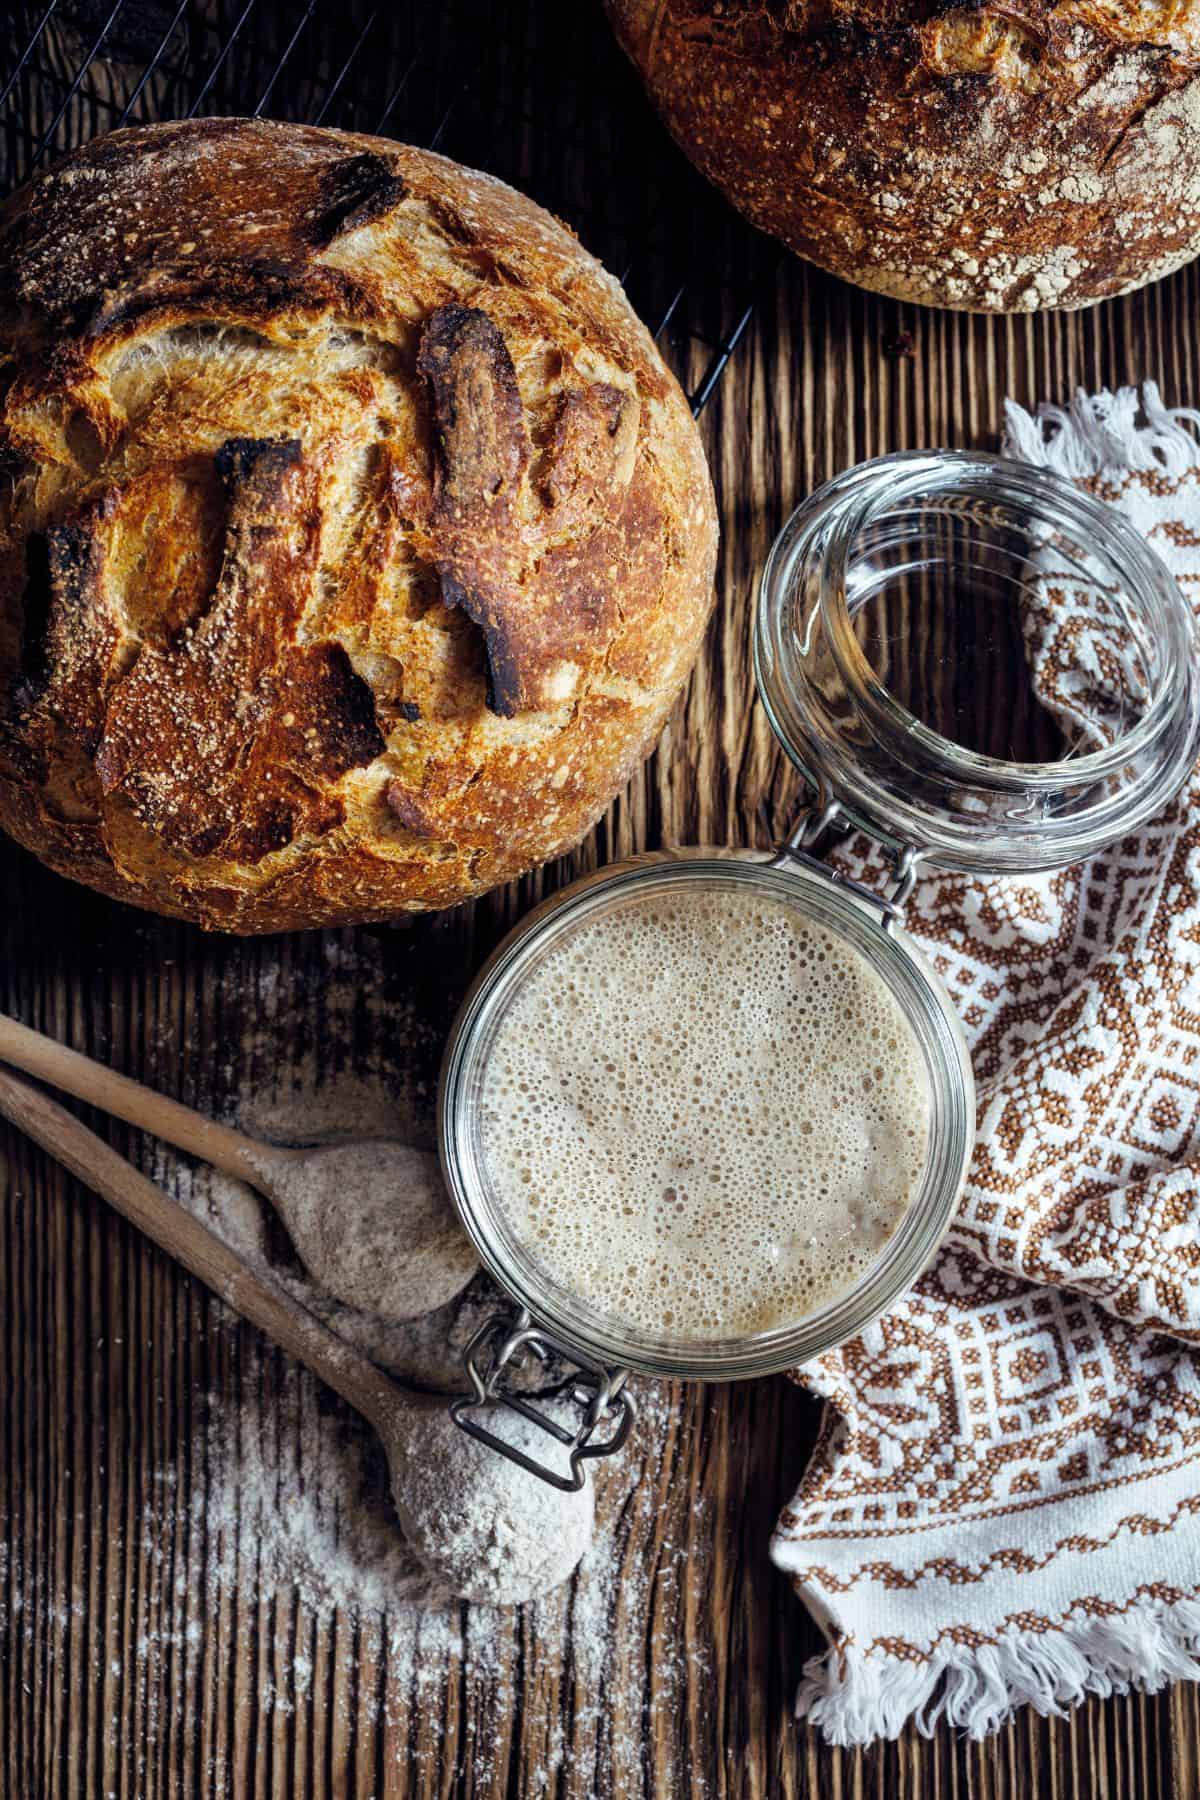 A top-down view of freshly baked loaves of crusty sourdough bread, a jar with flour, and a glass of a frothy beverage, all arranged on a rustic wooden surface with a